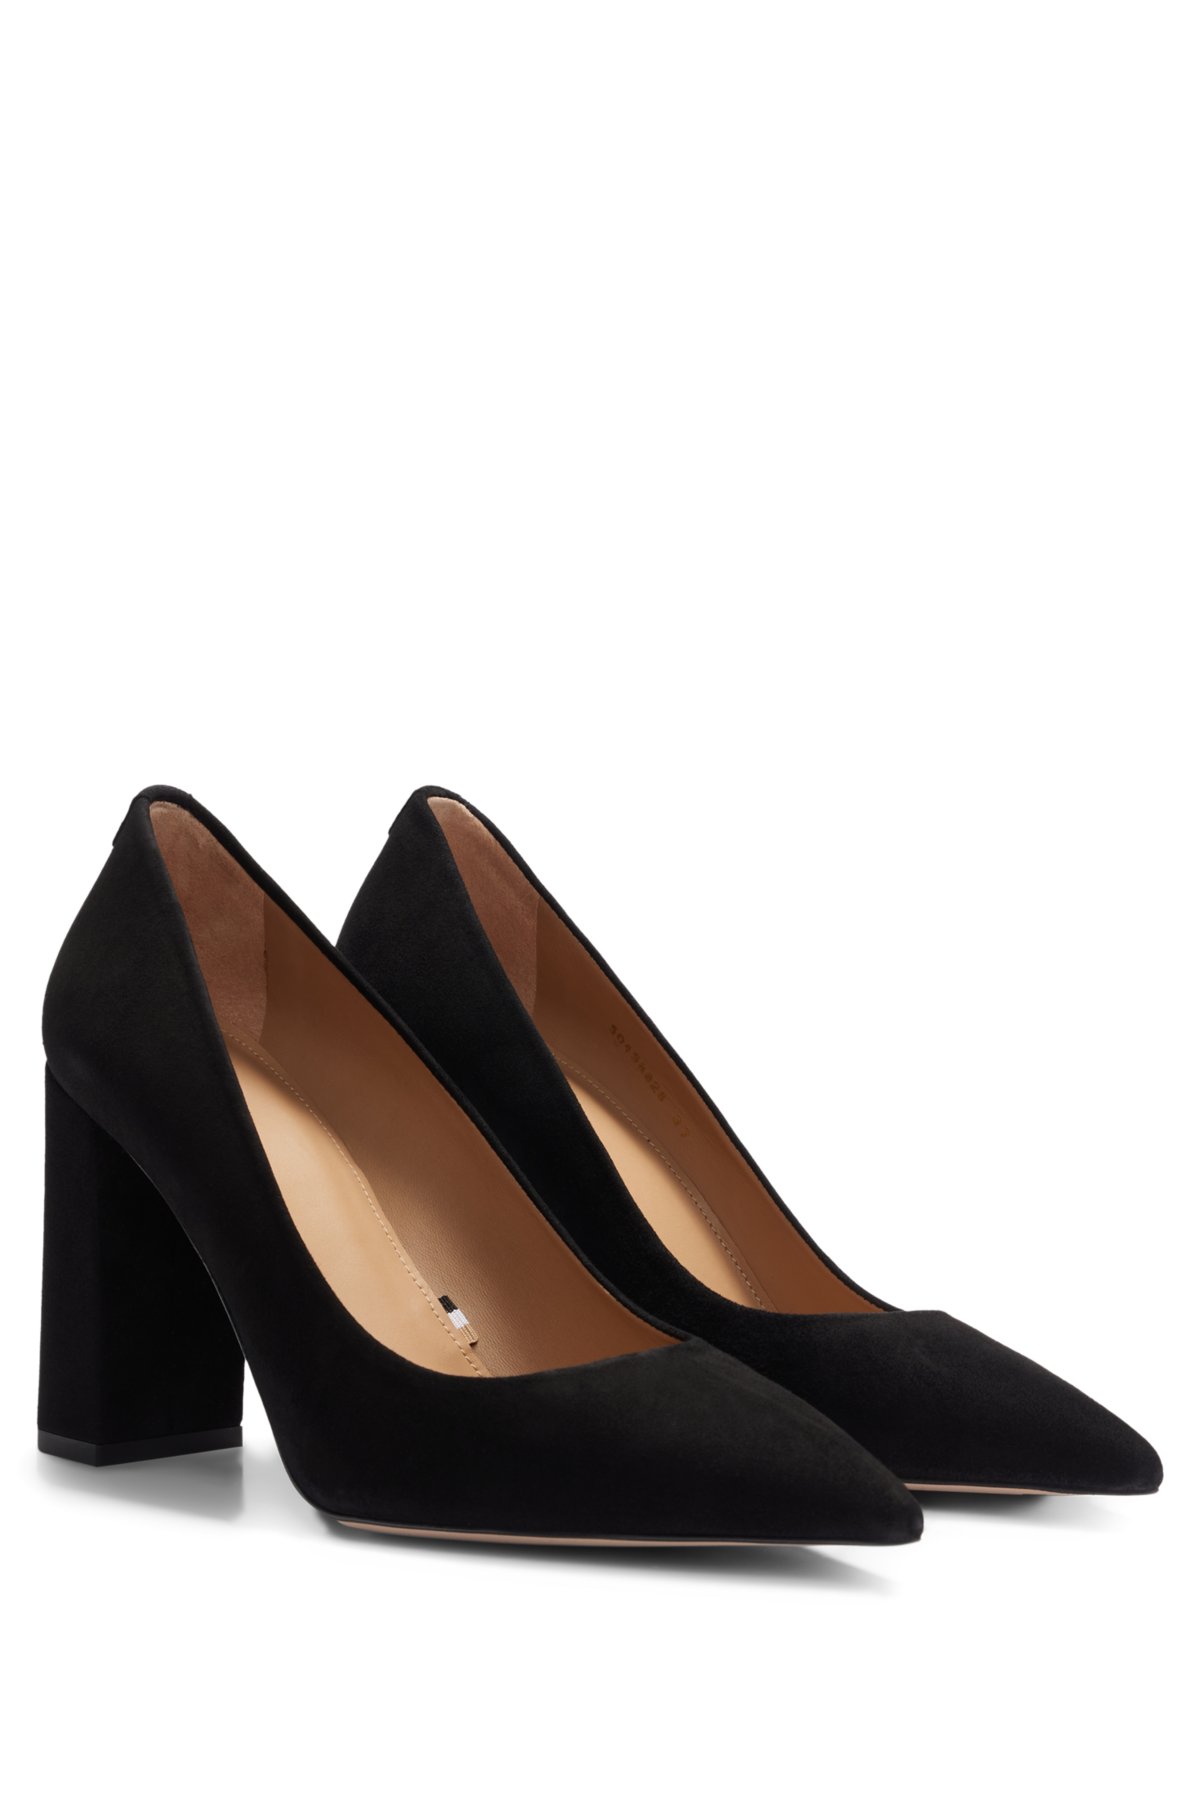 Women's Block-Heel Pumps in Suede with Pointed Toe - Black - Size 9